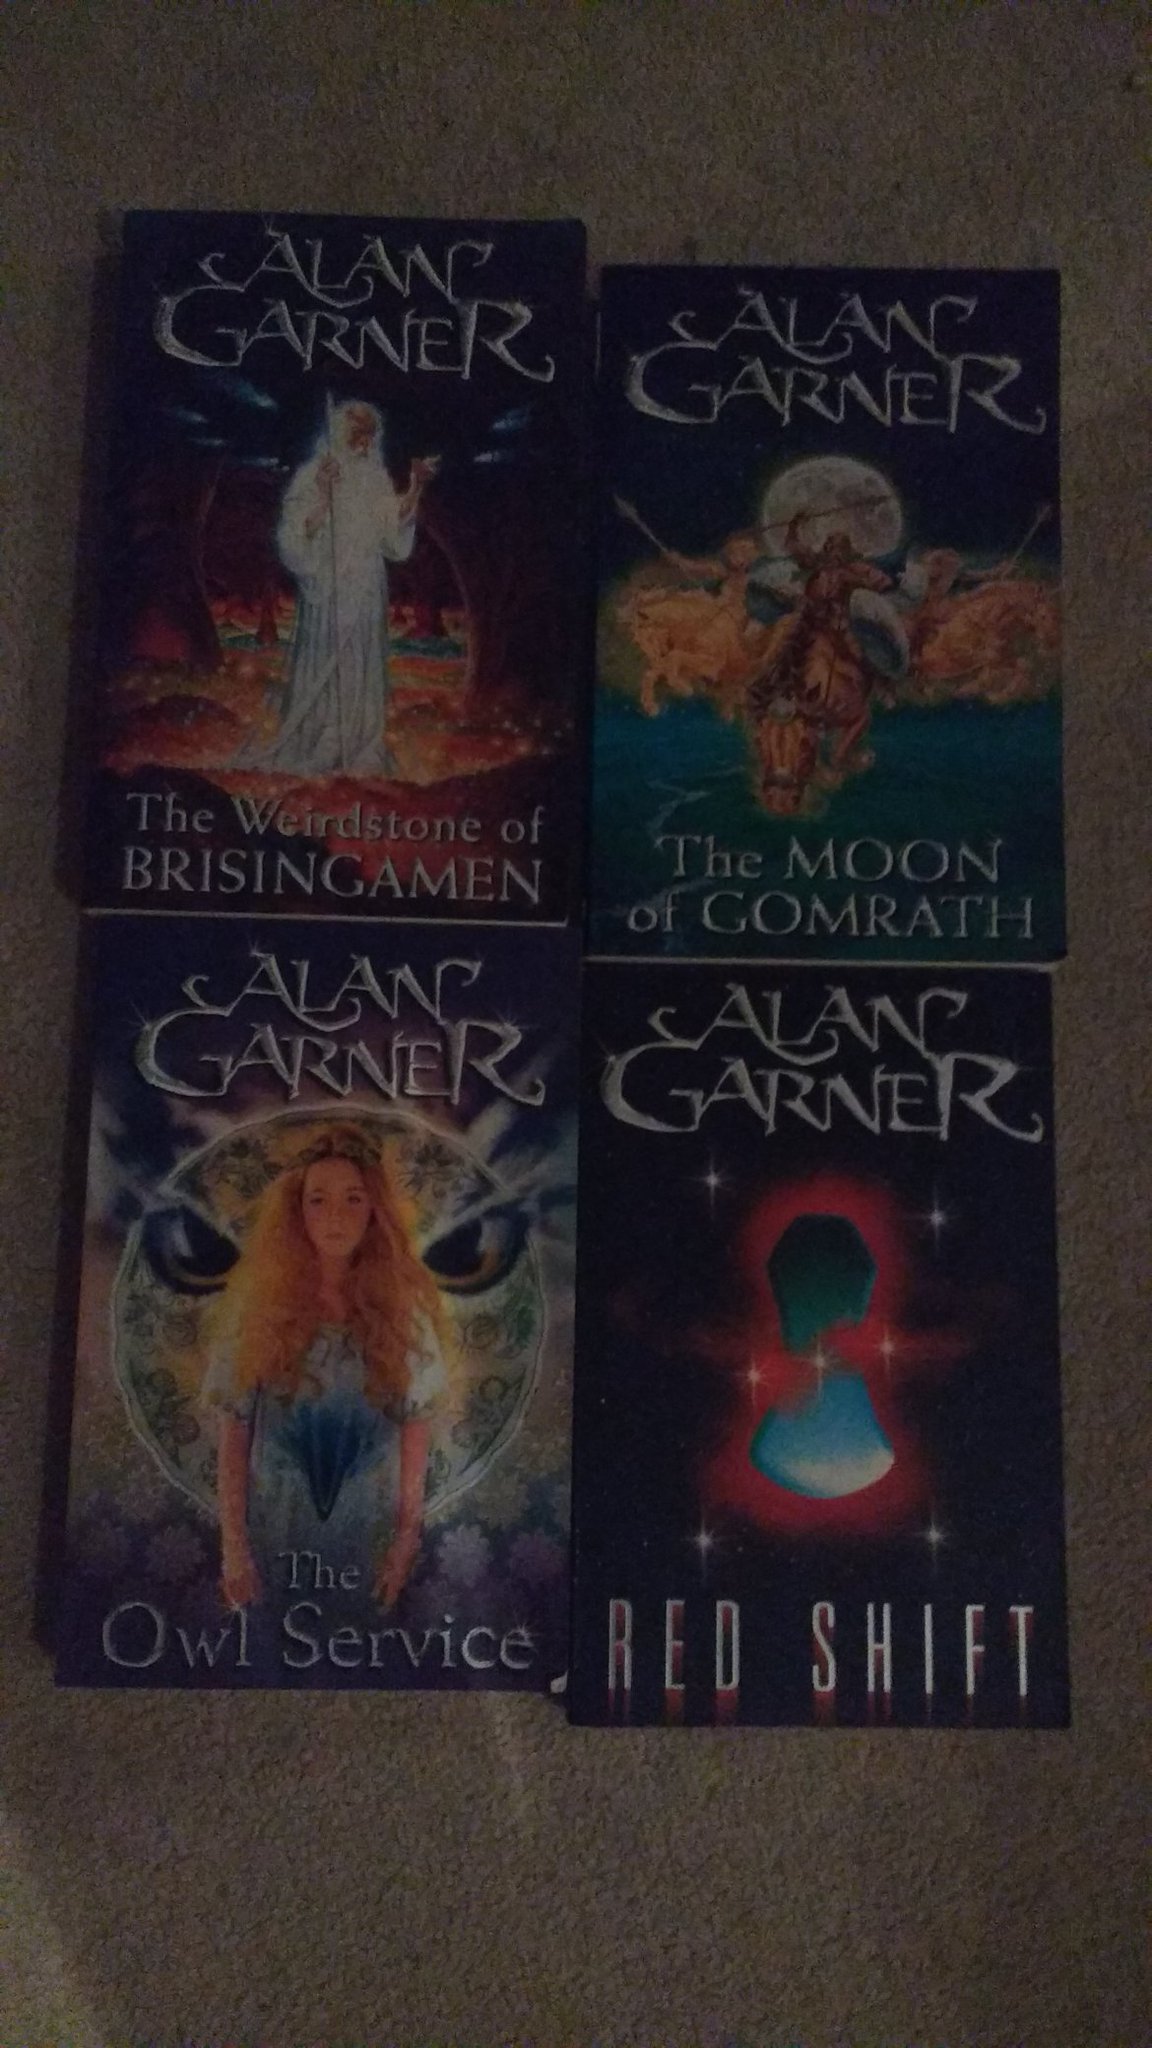 Happy 83rd birthday to the wonderful Alan Garner! Reading Moonstone and Gomrath at an early age changed my life 